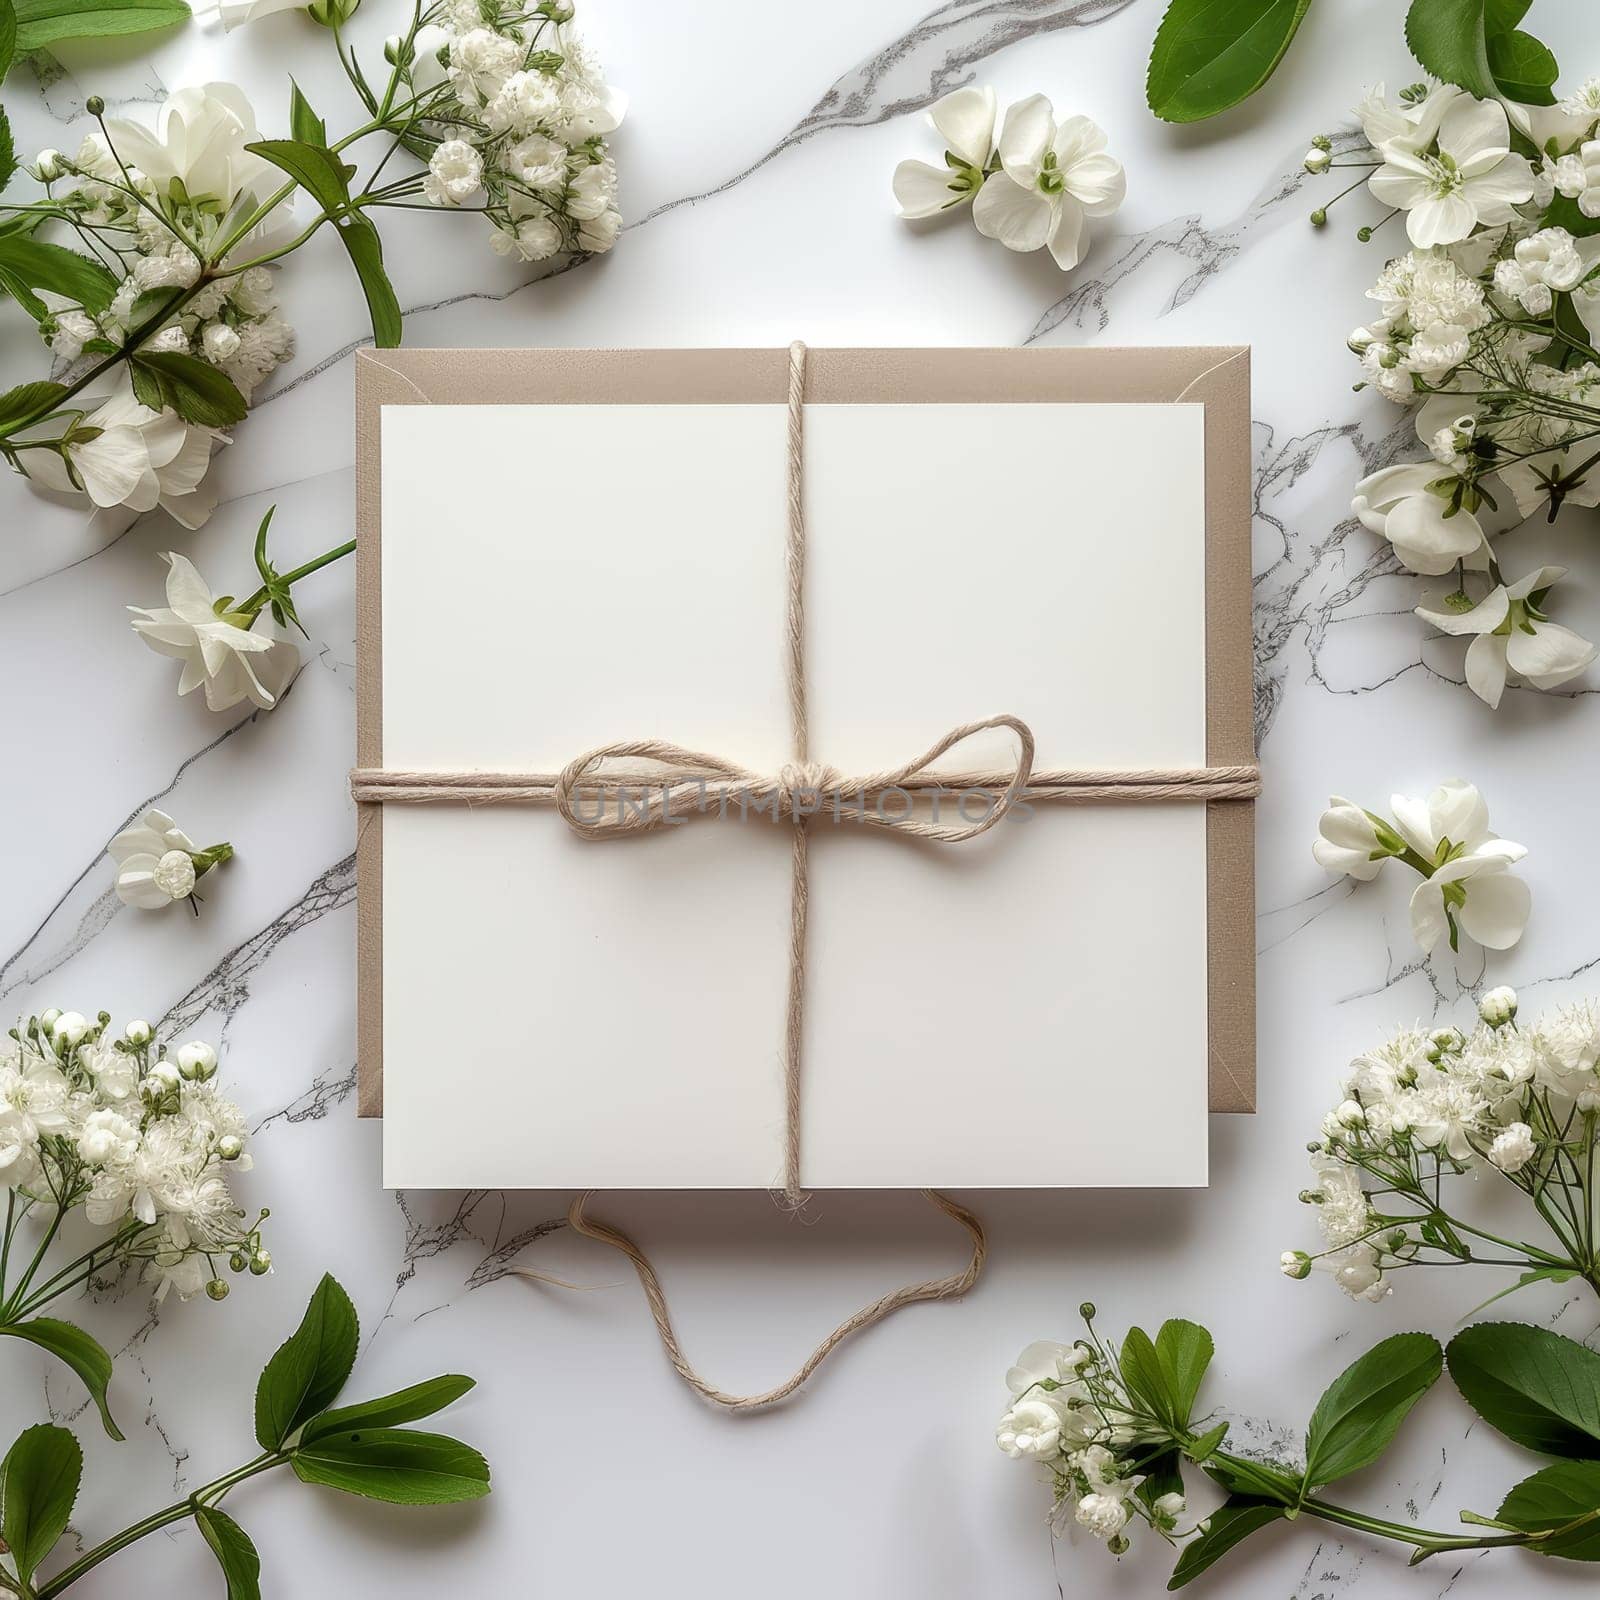 A simple, elegant invitation card wrapped in brown string lies among a sea of white blossoms, creating a harmonious rustic charm. The composition speaks of purity and simplicity, with grace